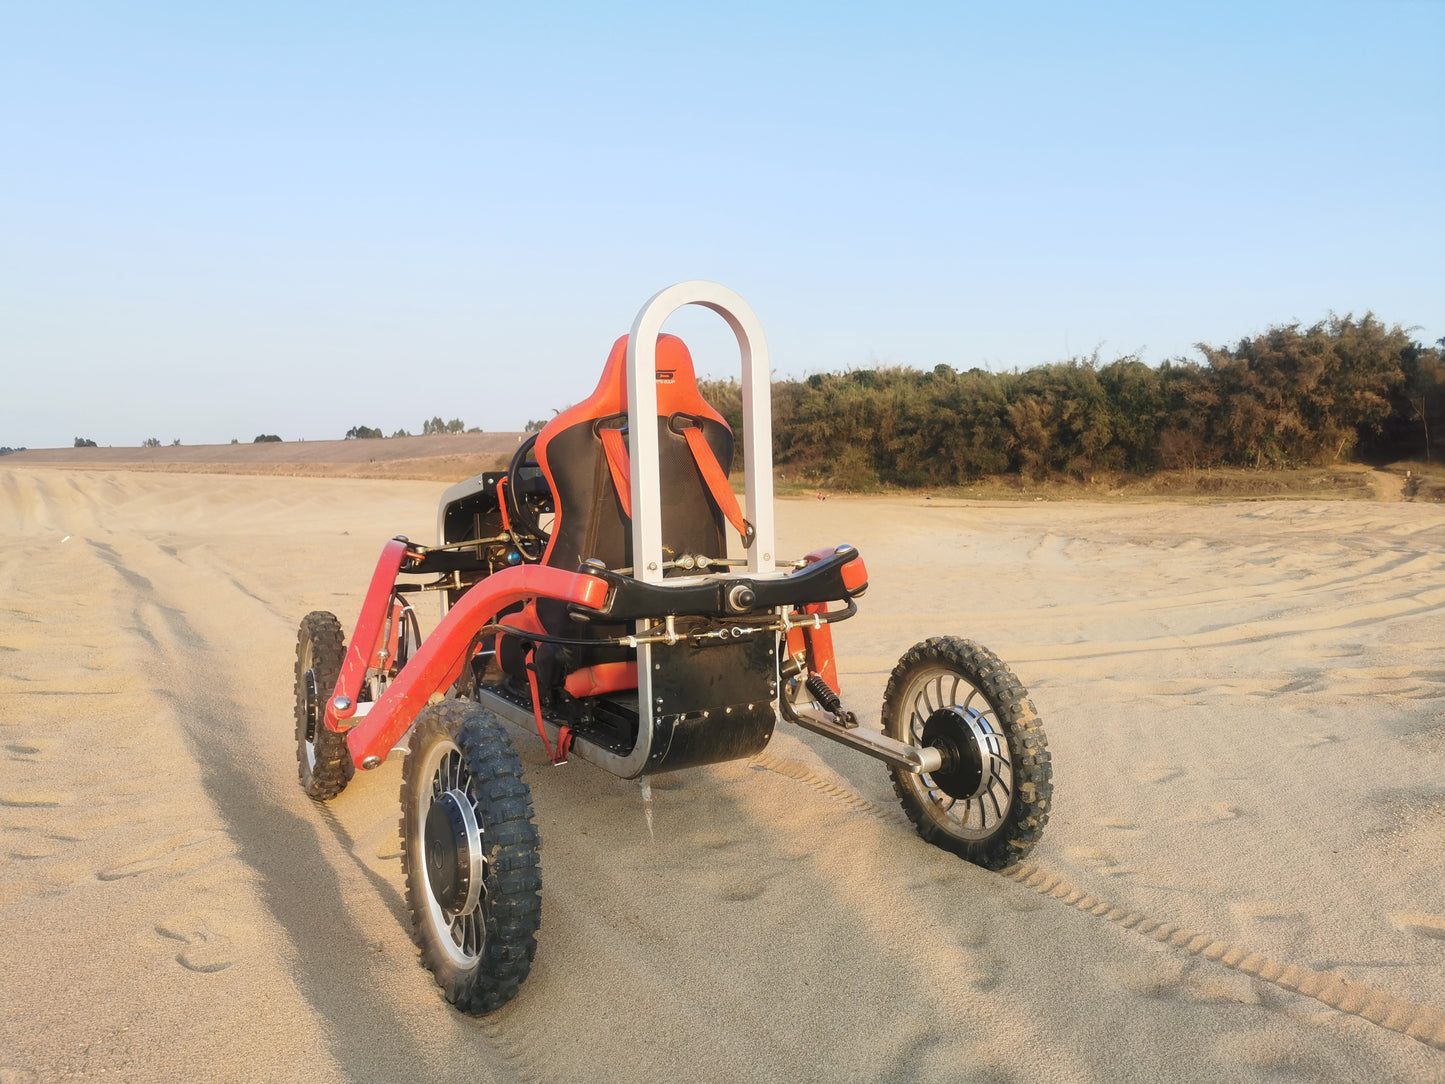 All-terrain electric off-road spider vehicle